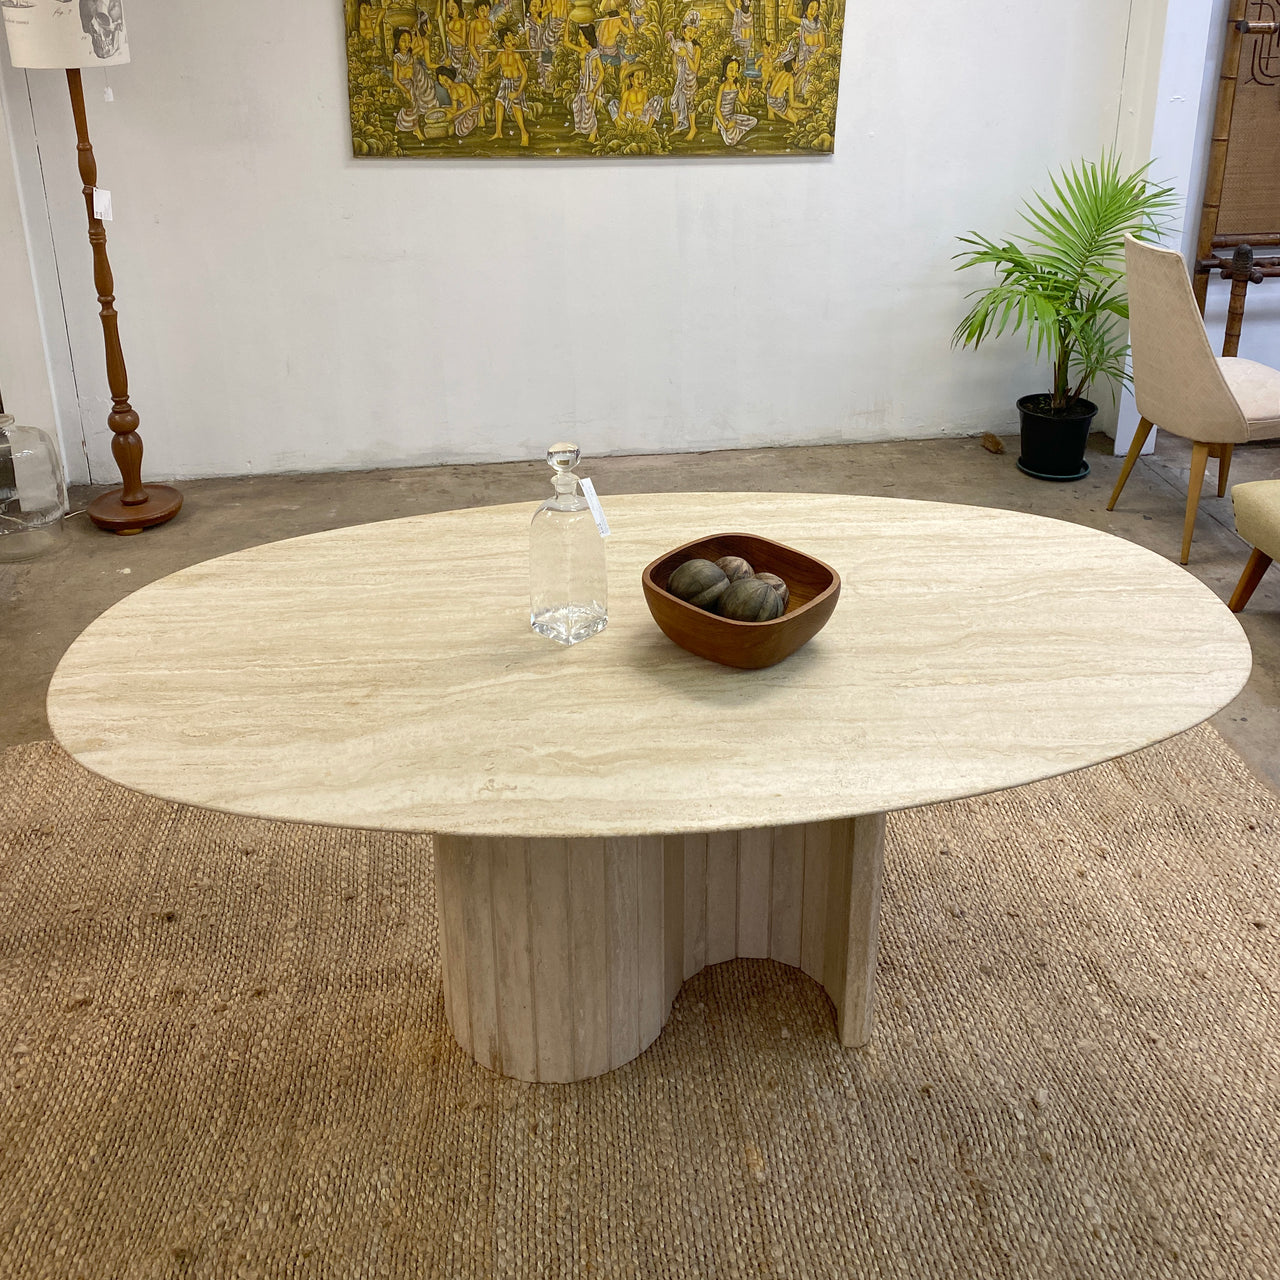 Vintage Unfilled Travertine Oval Dining Table S Shaped Base